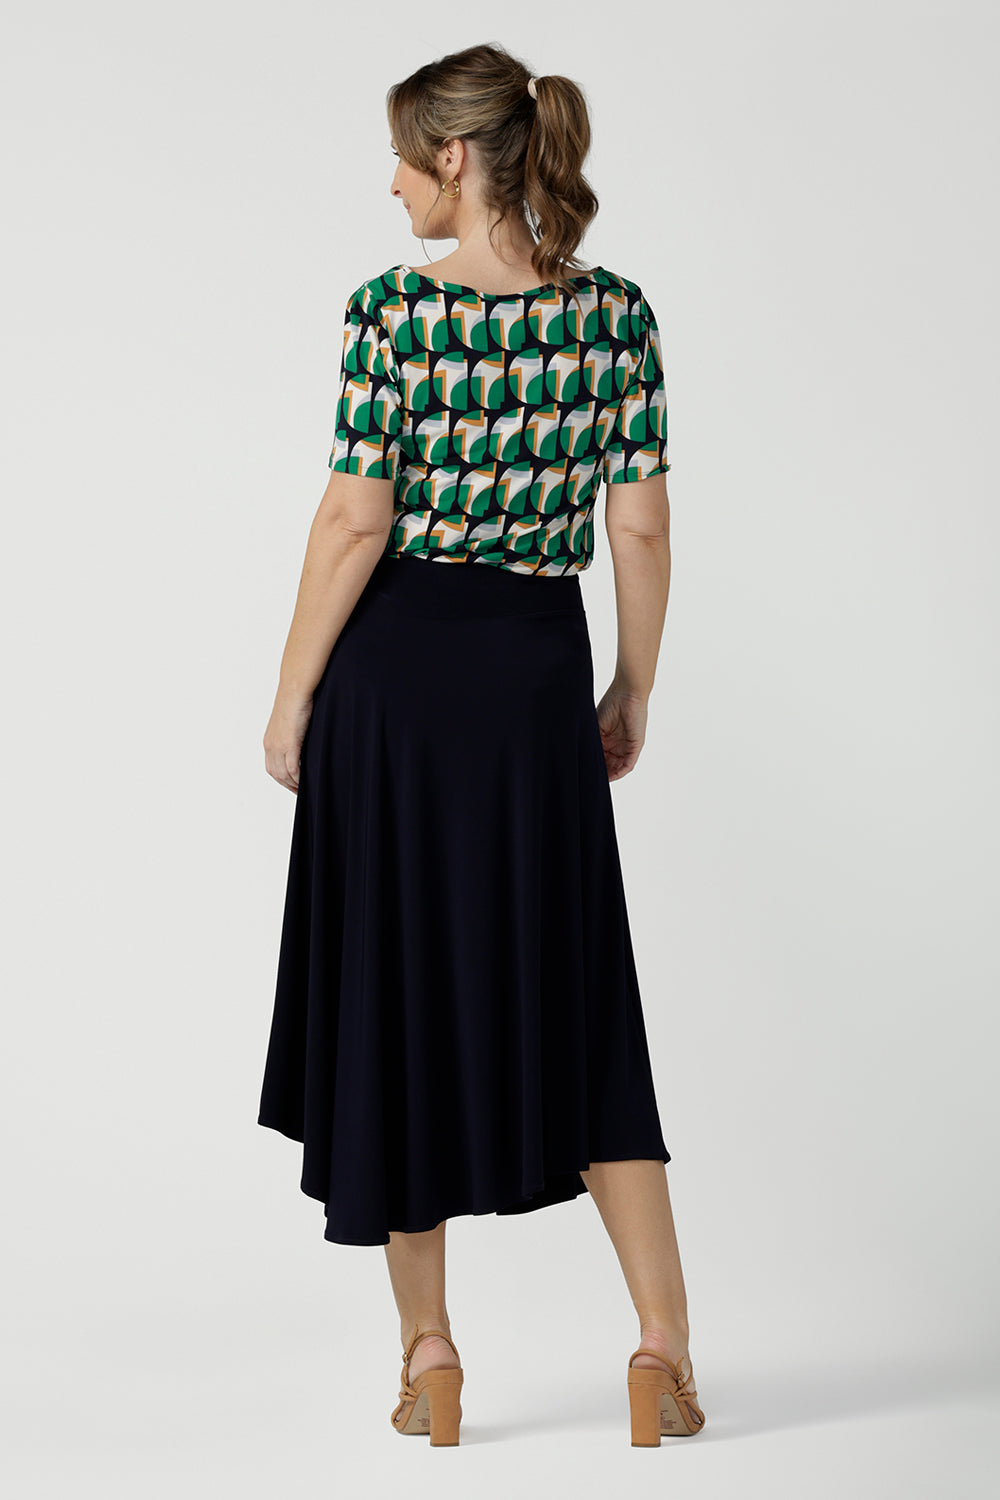 Back view of a size 10, 40 plus woman wears an asymmetric skirt in navy jersey. Worn with a geometric print, boat neck top with short sleeves, this comfortable jersey skirt works for work wear and eveningwear. Made in Australia by women's clothing brand, Leina & Fleur in petite, mid size and plus sizes.